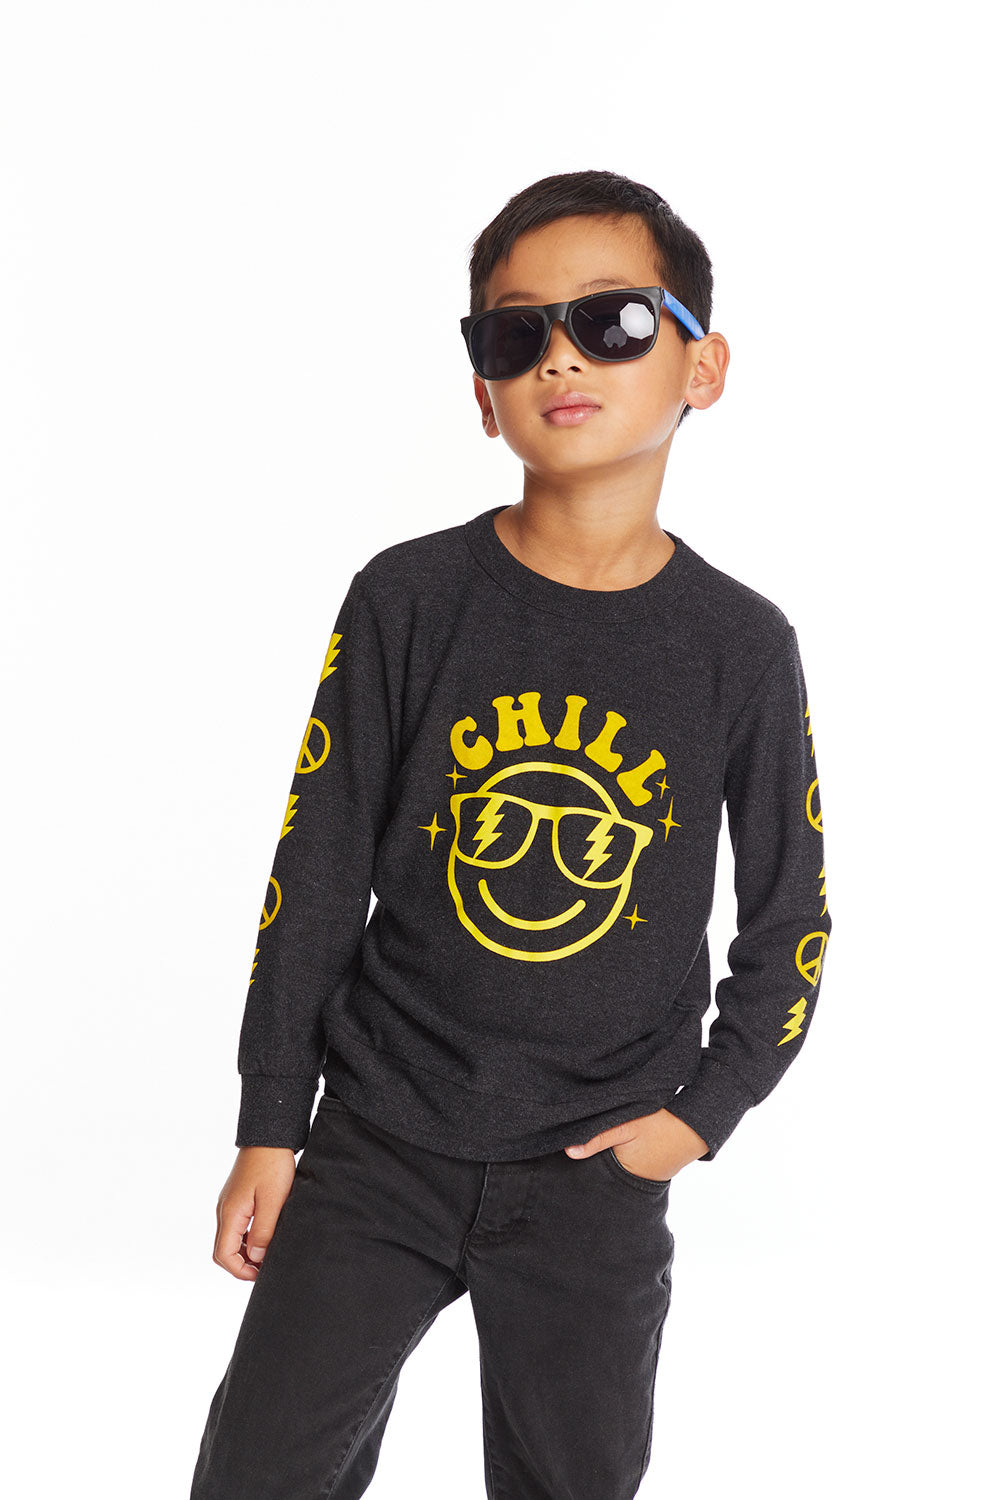 Chill Boys Long Sleeve Boys chaserbrand